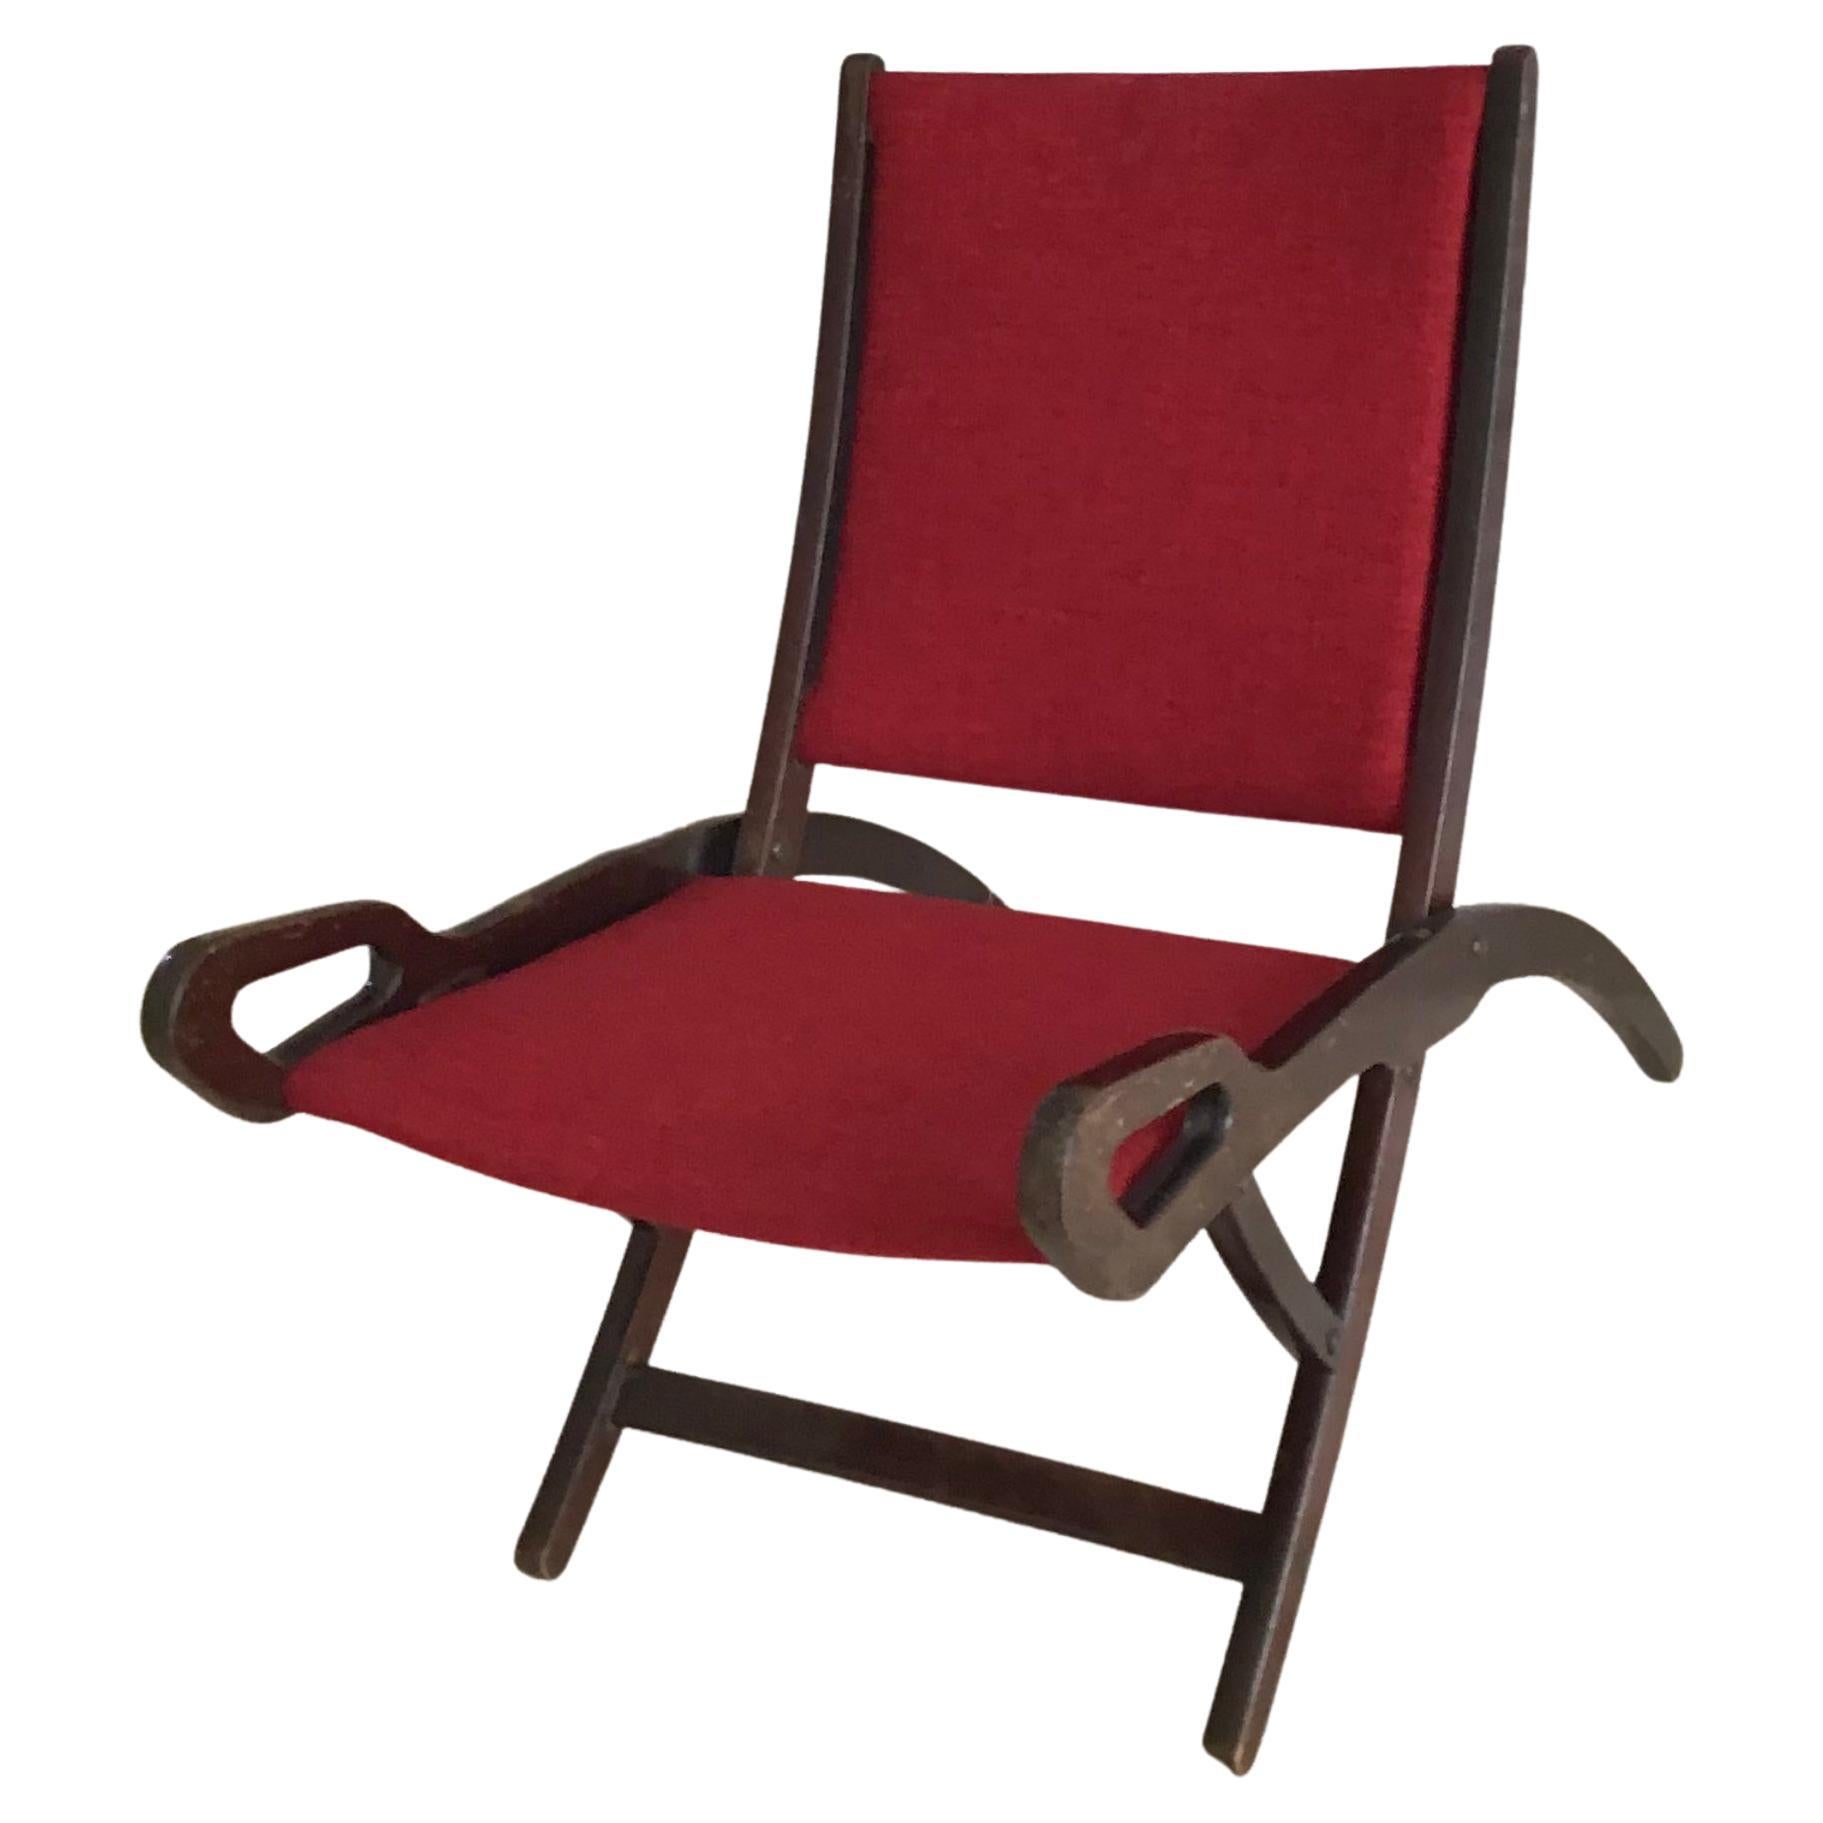 Gio’ Ponti FR” Armchair Wood Brass Upholstered Seat and Back, 1960, Italy For Sale